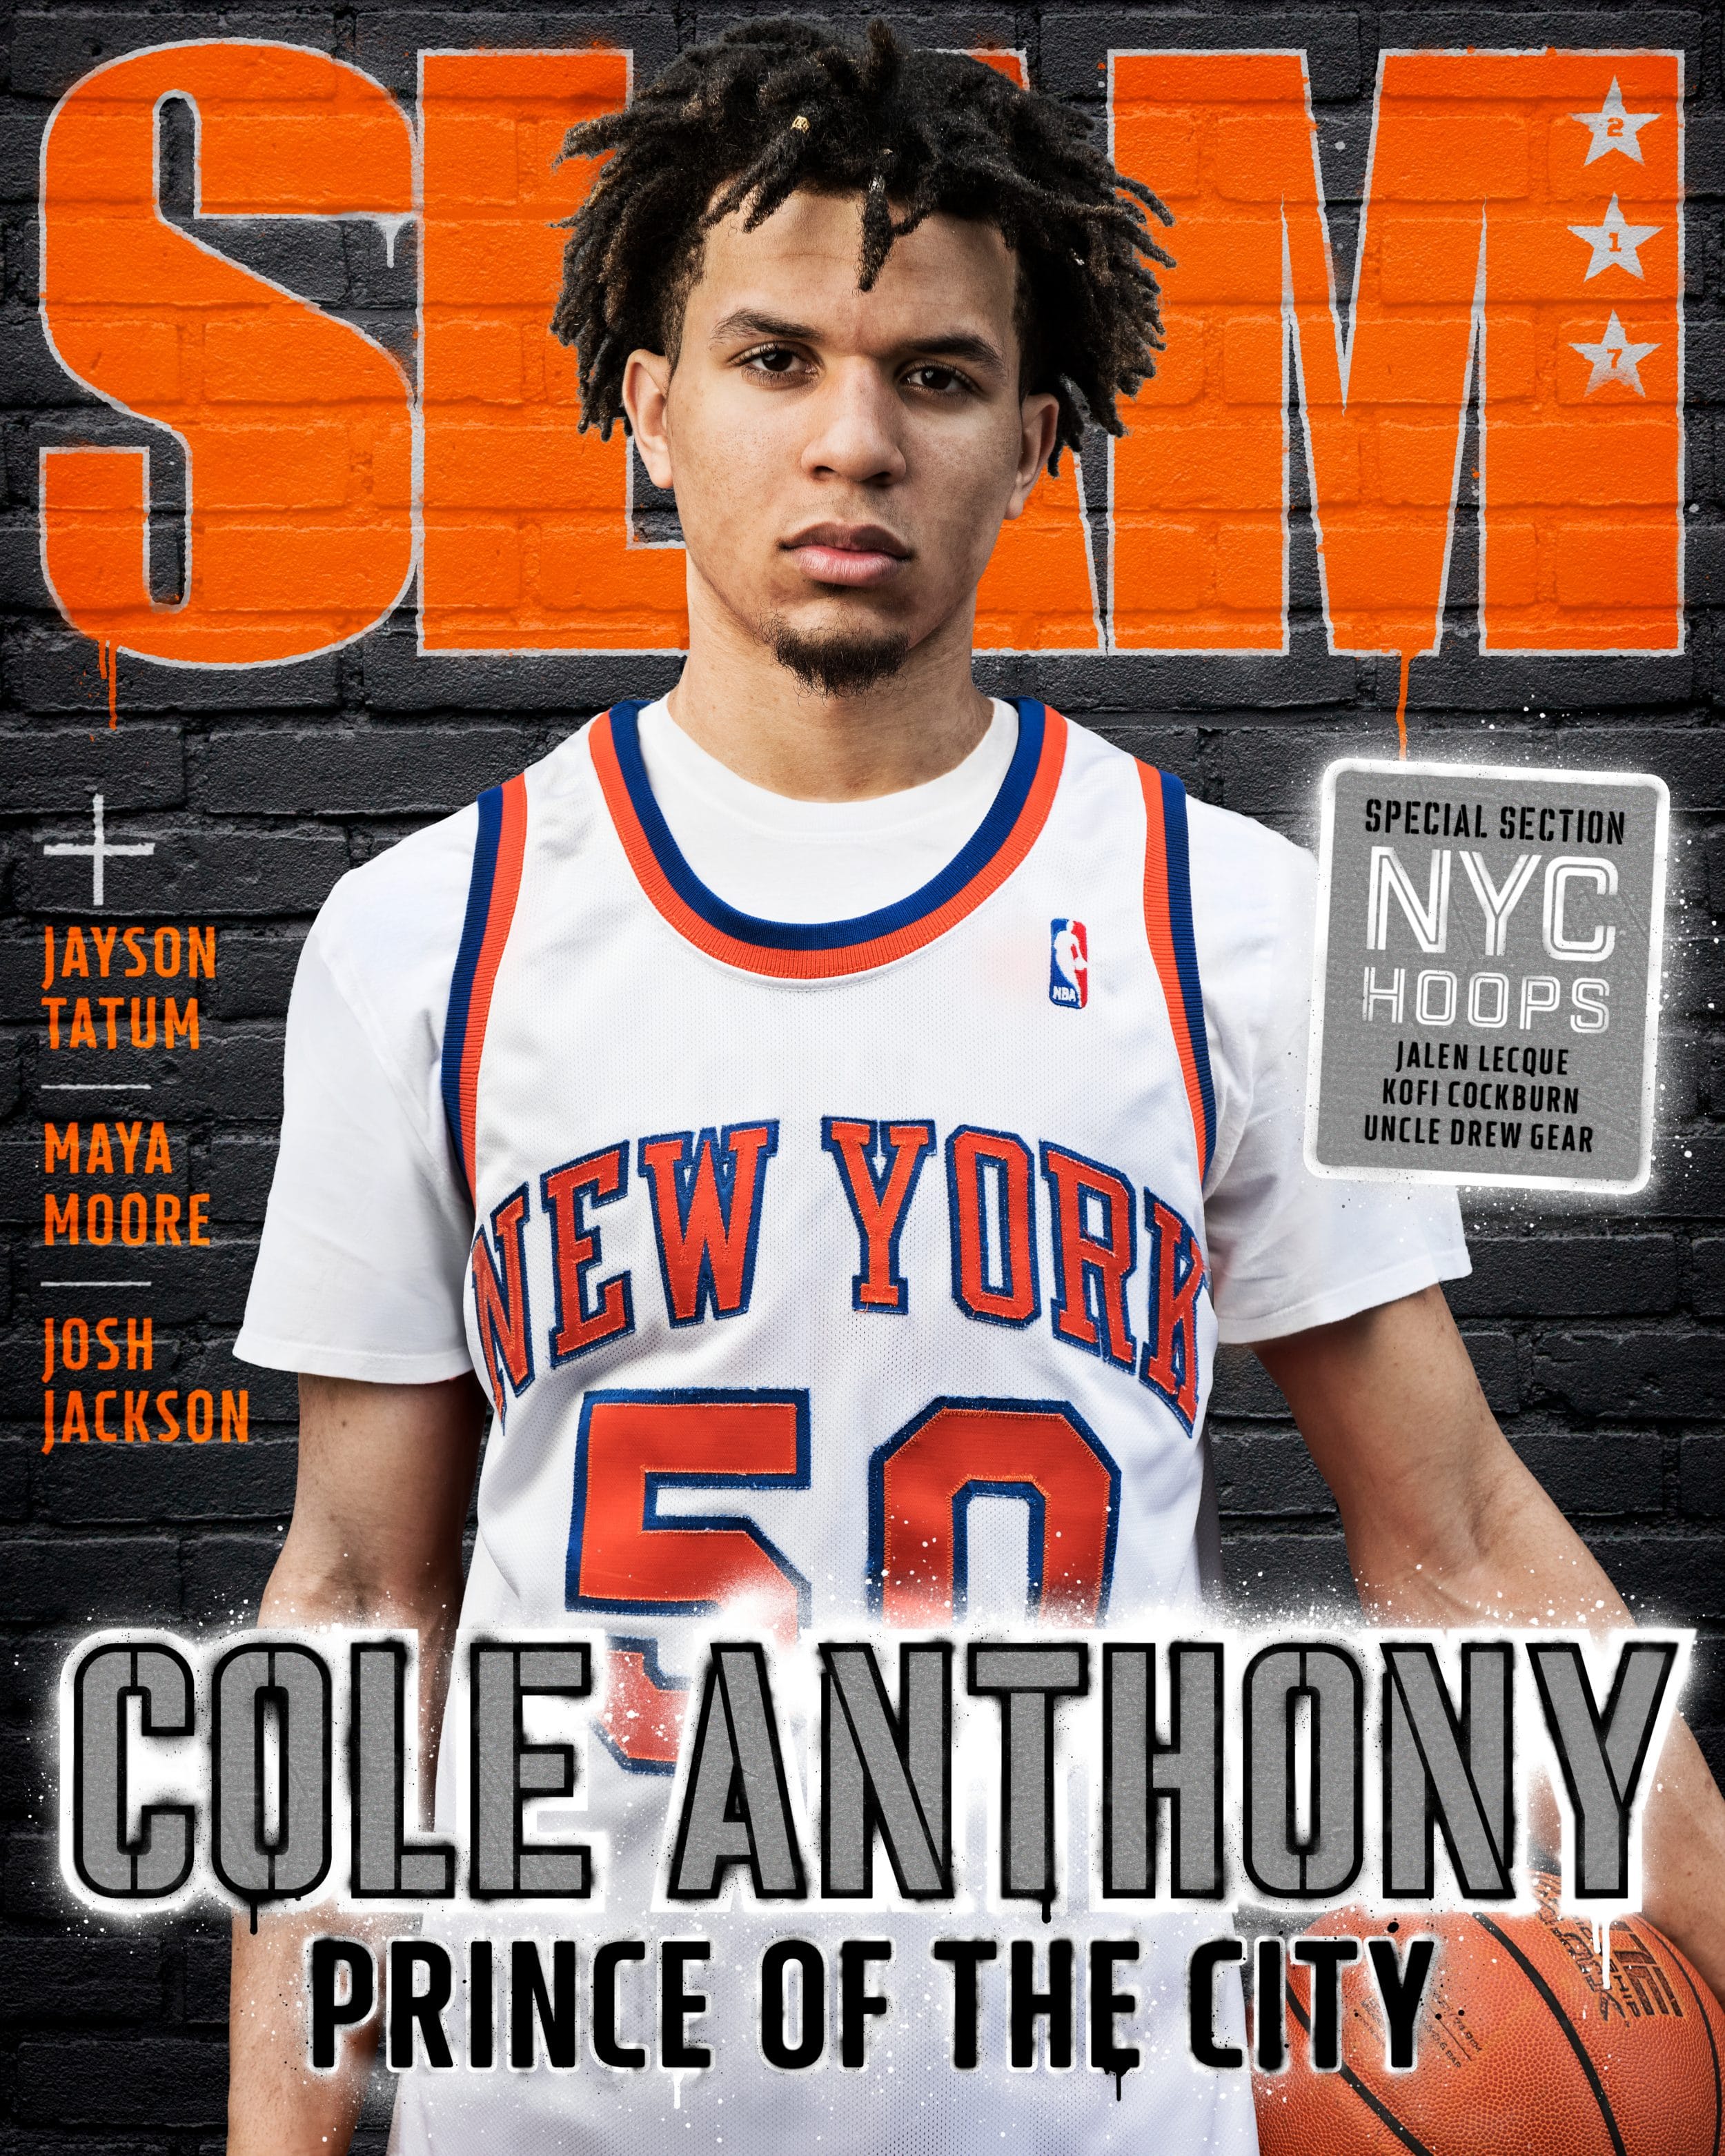 COLE SUMMER: High School Point Guard Cole Anthony Runs New